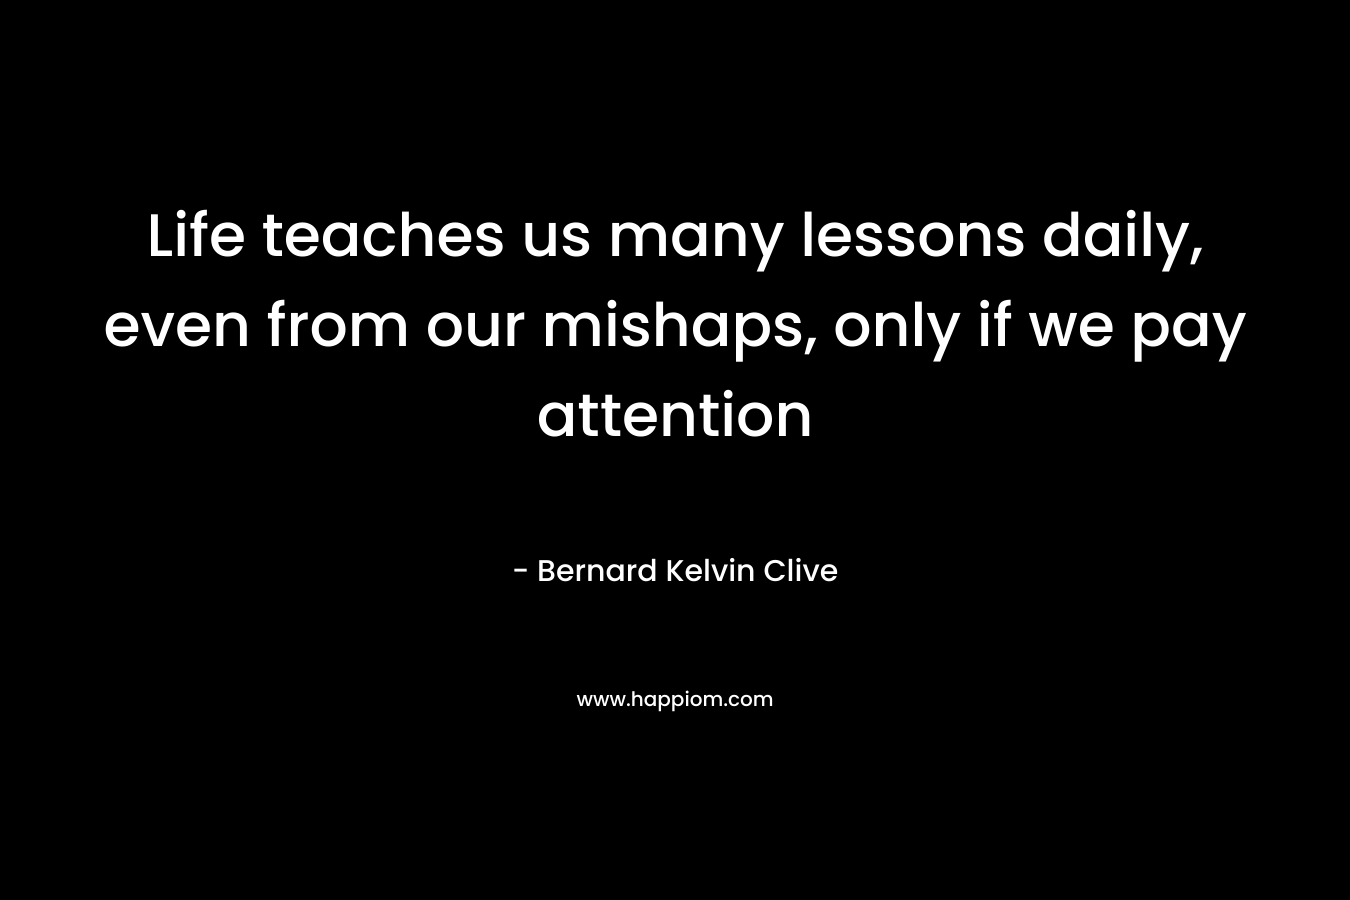 Life teaches us many lessons daily, even from our mishaps, only if we pay attention